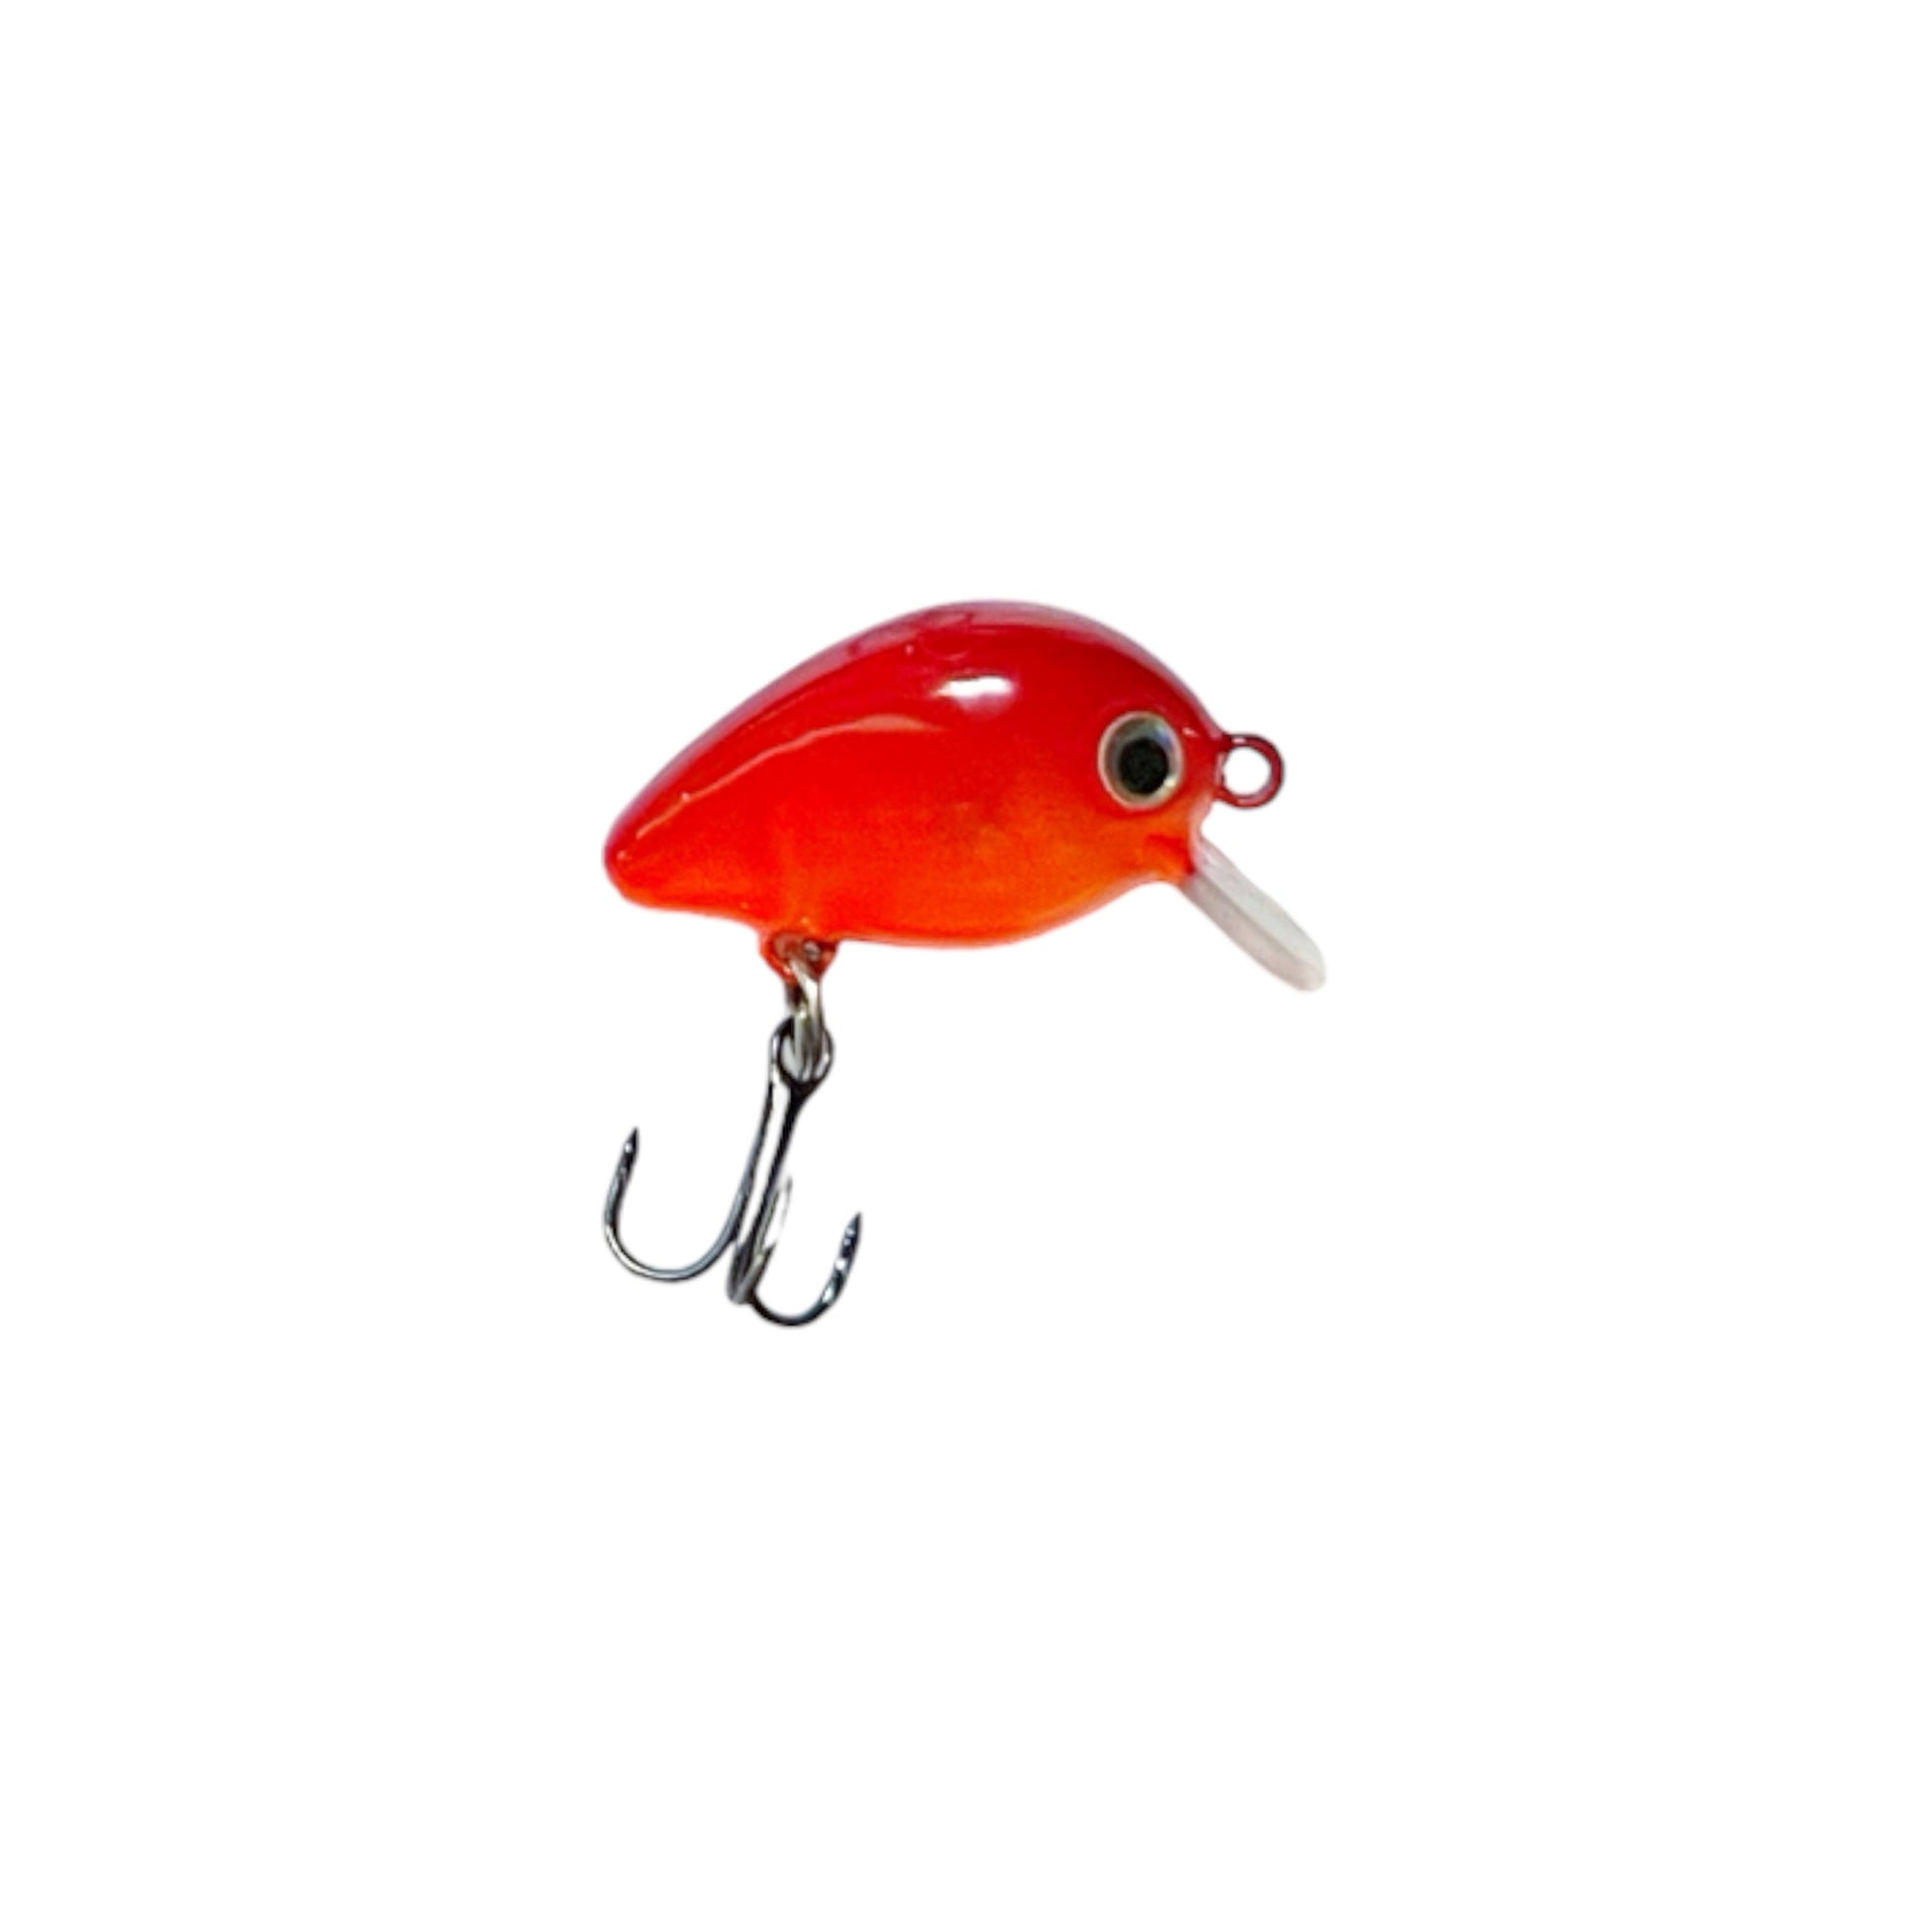 Red and orange panfish micro lure with bill, one hook, and ilver eyes. 